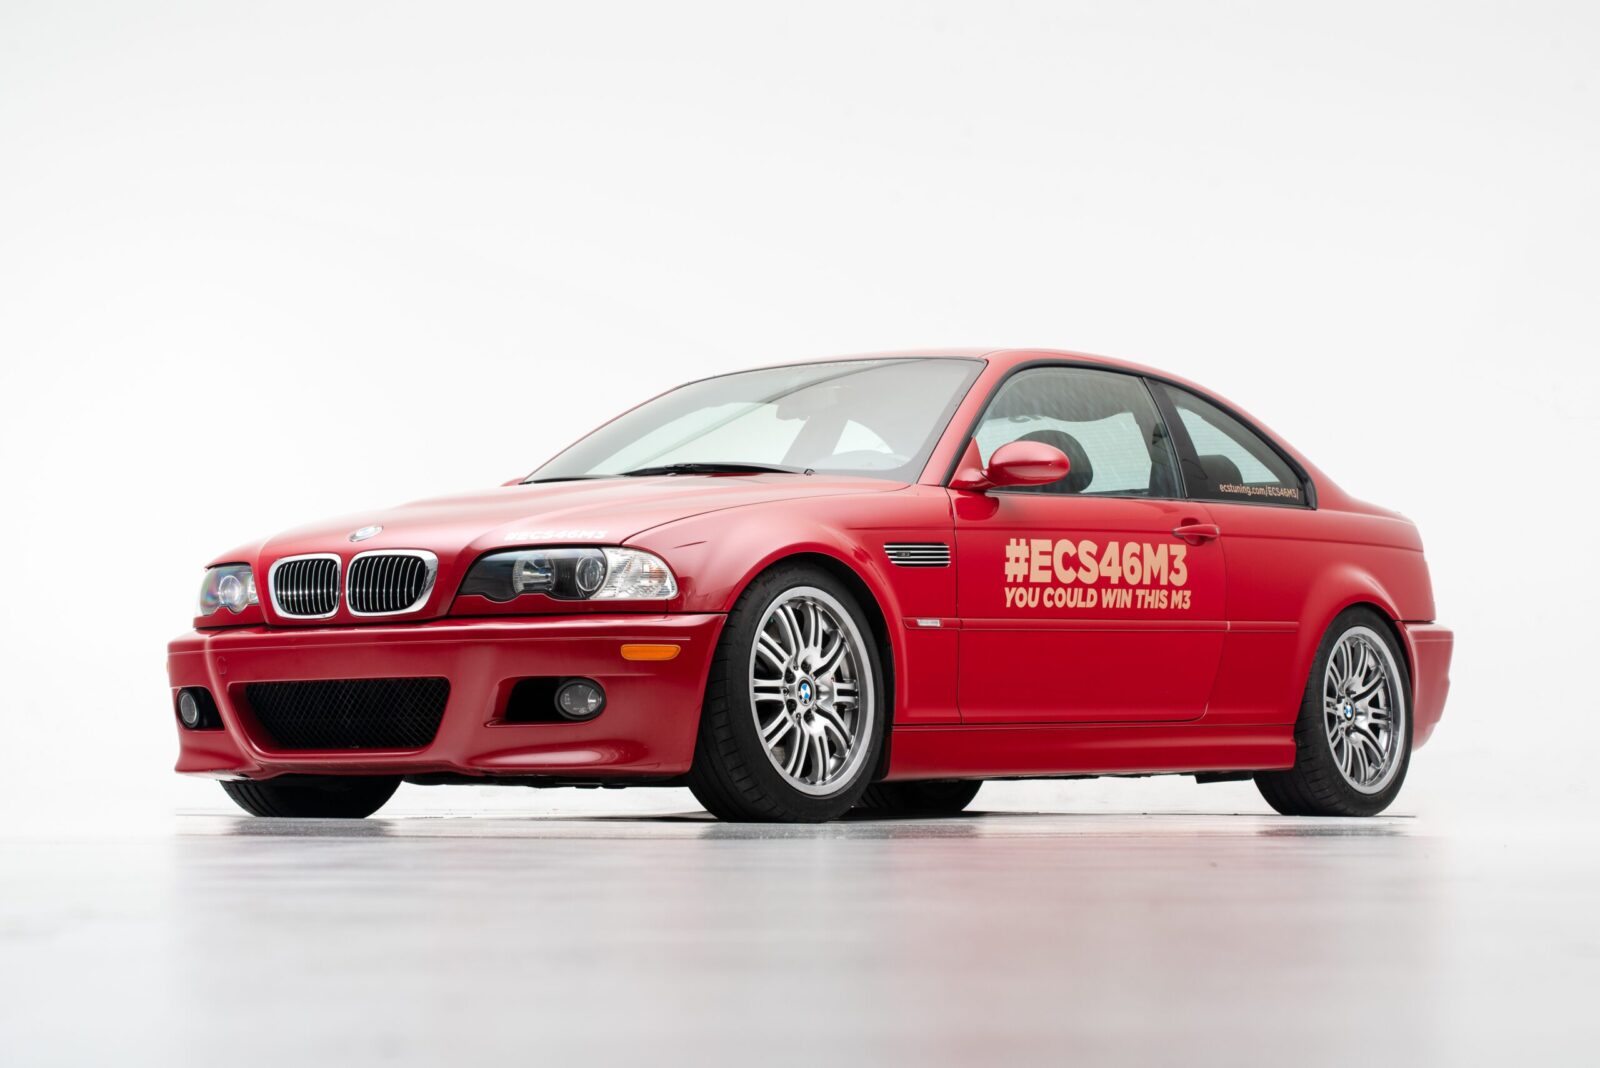 Which Oil is Best for Bmw E46?